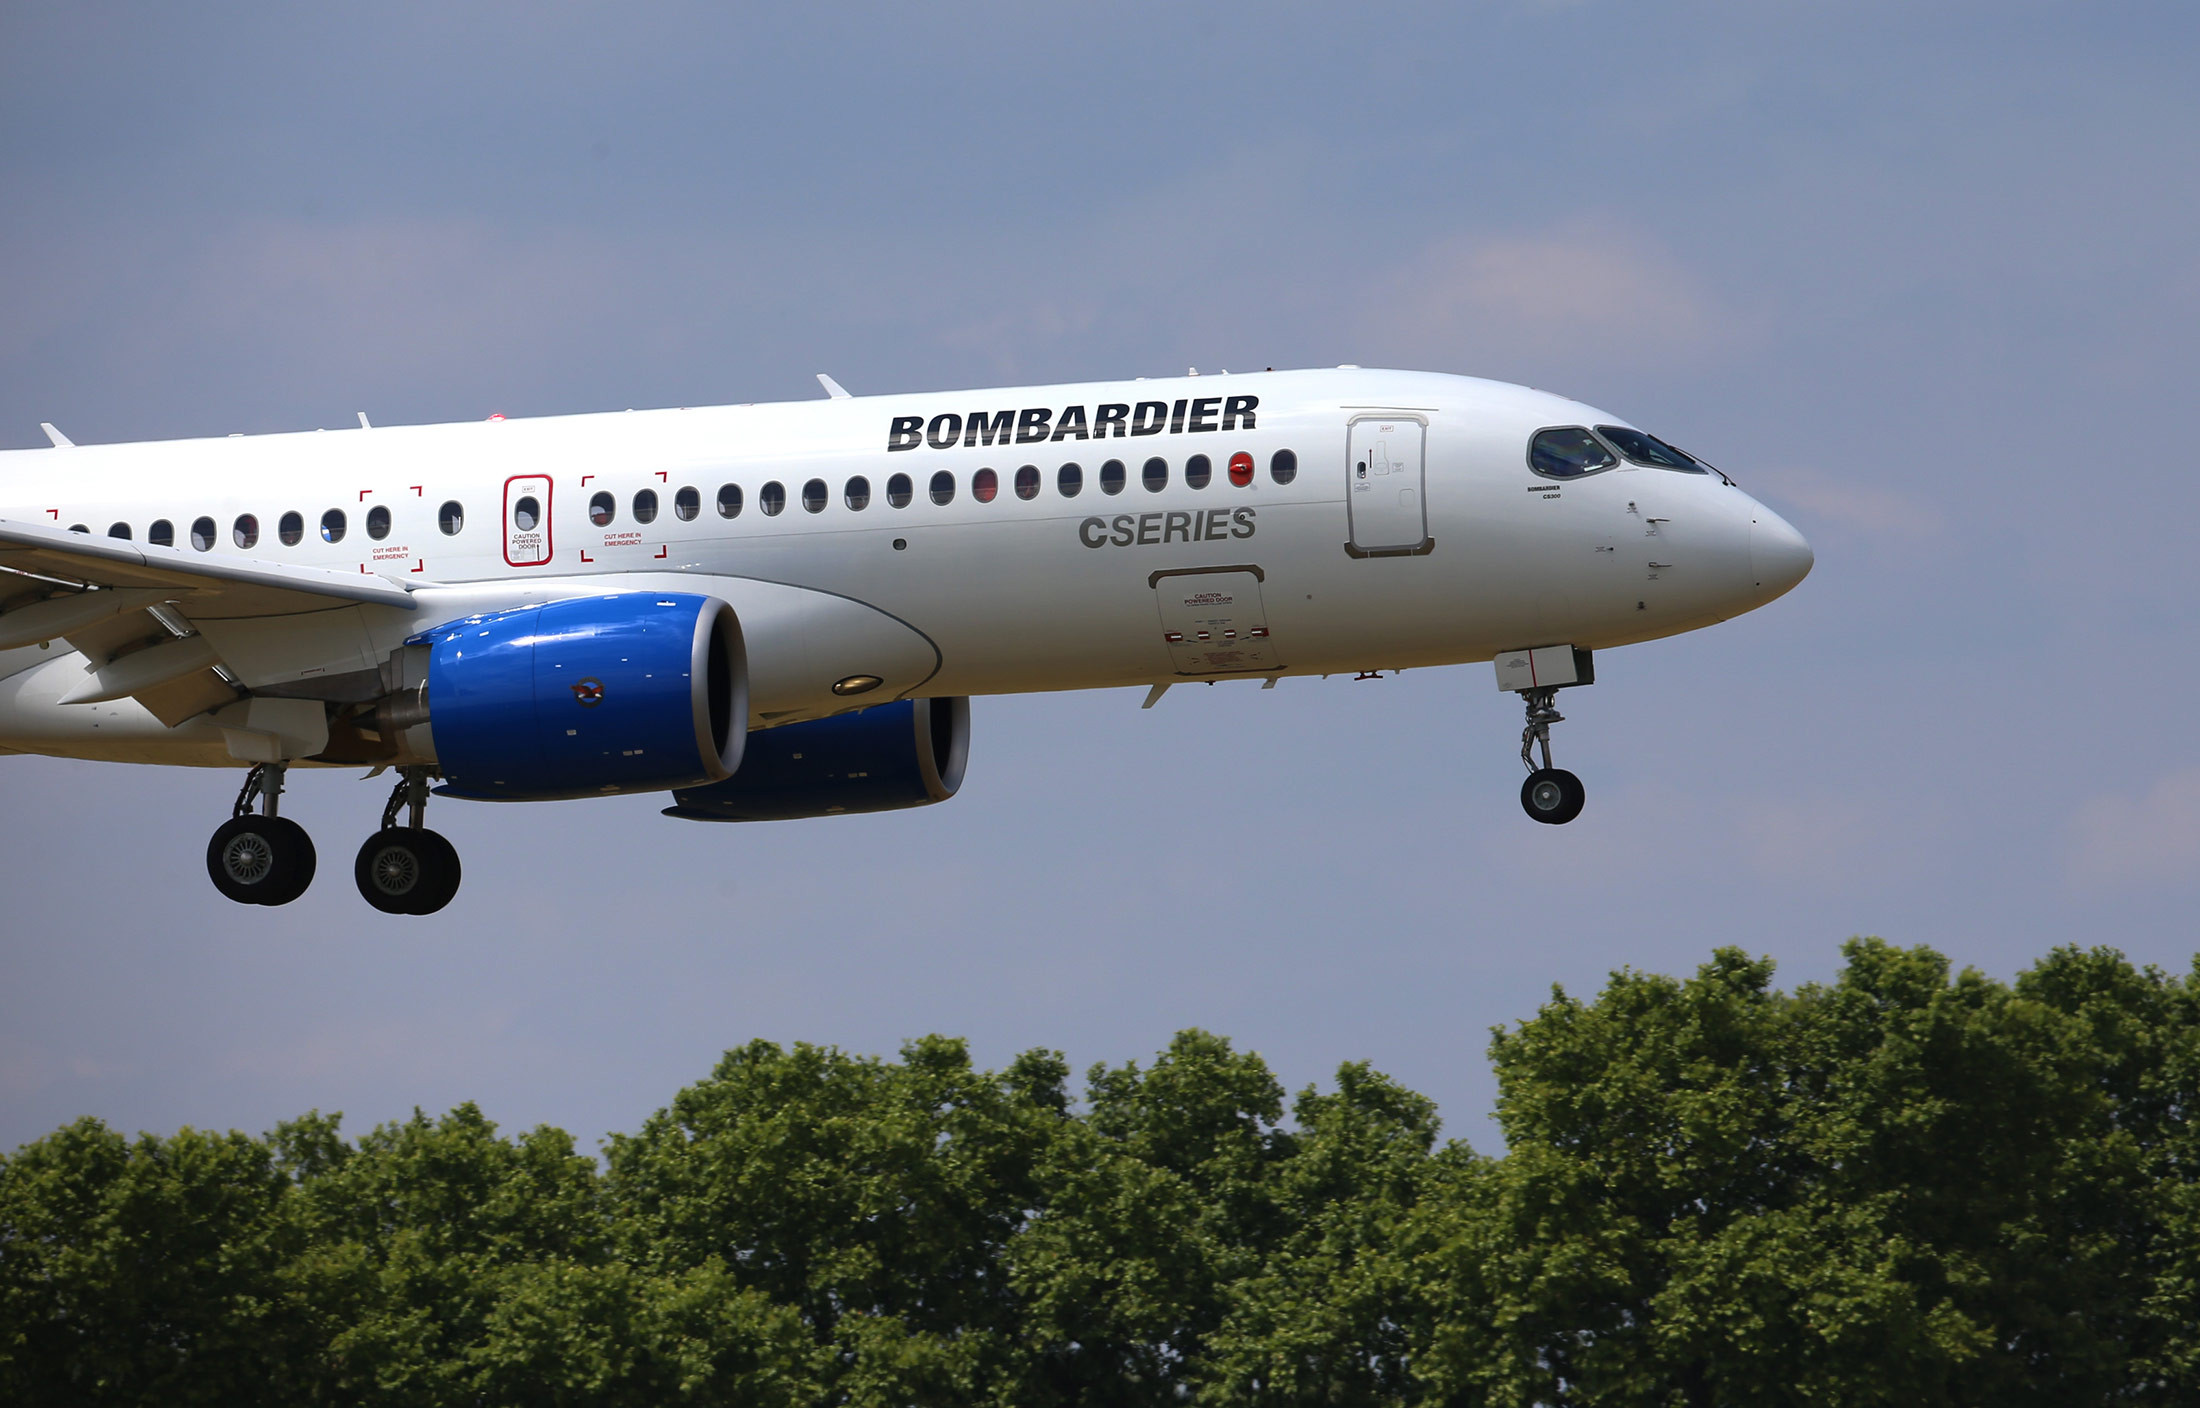 A Bombardier CS300 C Series aircraft, manufactured by Bombardier Inc., lands after a flying display on day two of the 51st International Paris Air Show in Paris, France, on Tuesday, June 16, 2015. The 51st International Paris Air Show is the world's largest aviation and space industry exhibition and takes place at Le Bourget airport June 15 - 21.